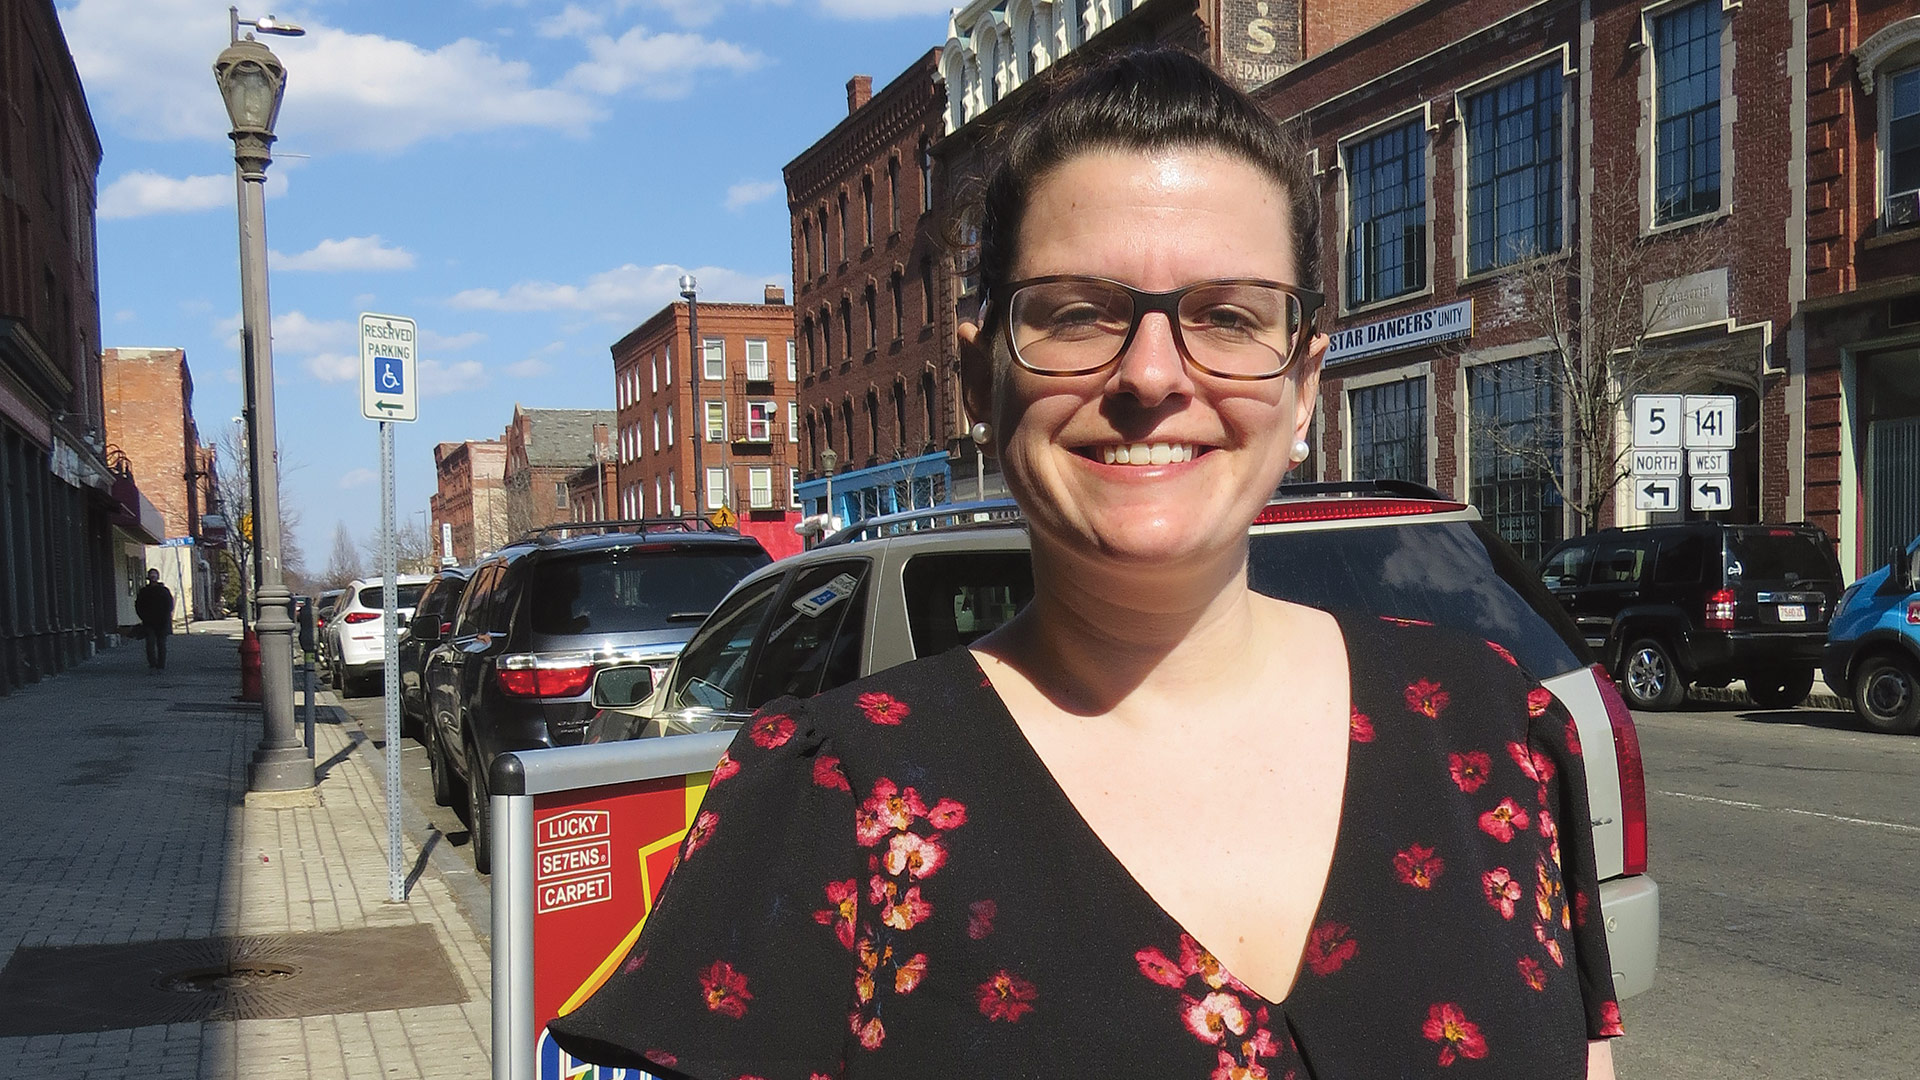 Tessa Murphy-Romboletti, executive director EforAll, Alex Morse, was encouraged by the progress being made in her hometown, and wanted to play a bigger role in those efforts.